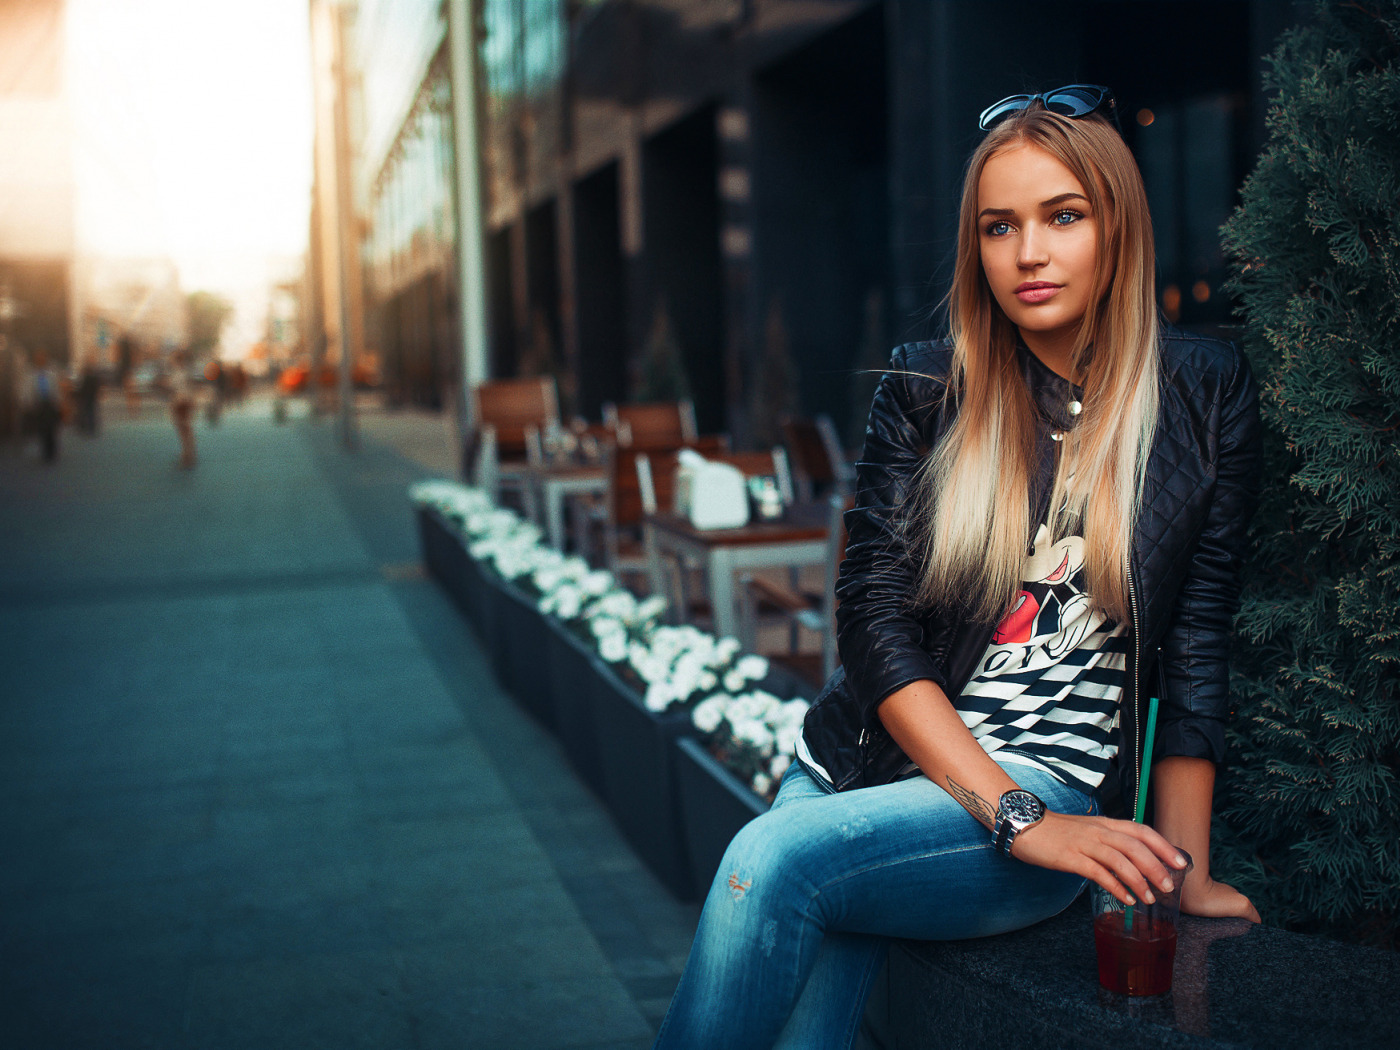 Maria Puchnina Model Blonde Women With Shades Long Hair Jacket Leather Jackets Jeans Black Jackets S 1400x1050